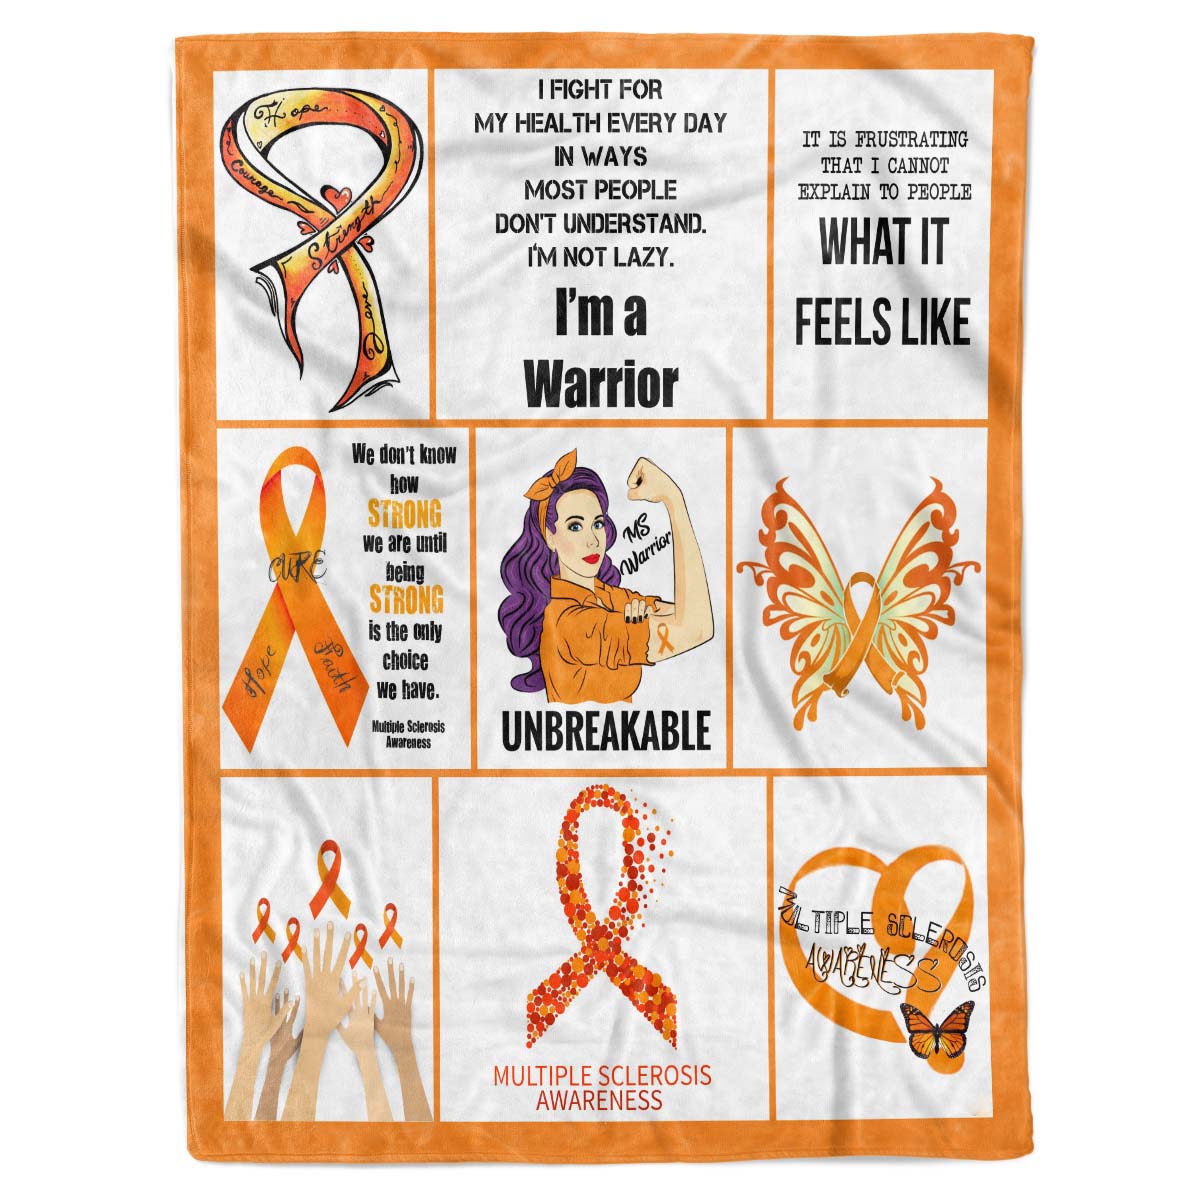 Good and Bad Gifts for Someone With Multiple Sclerosis